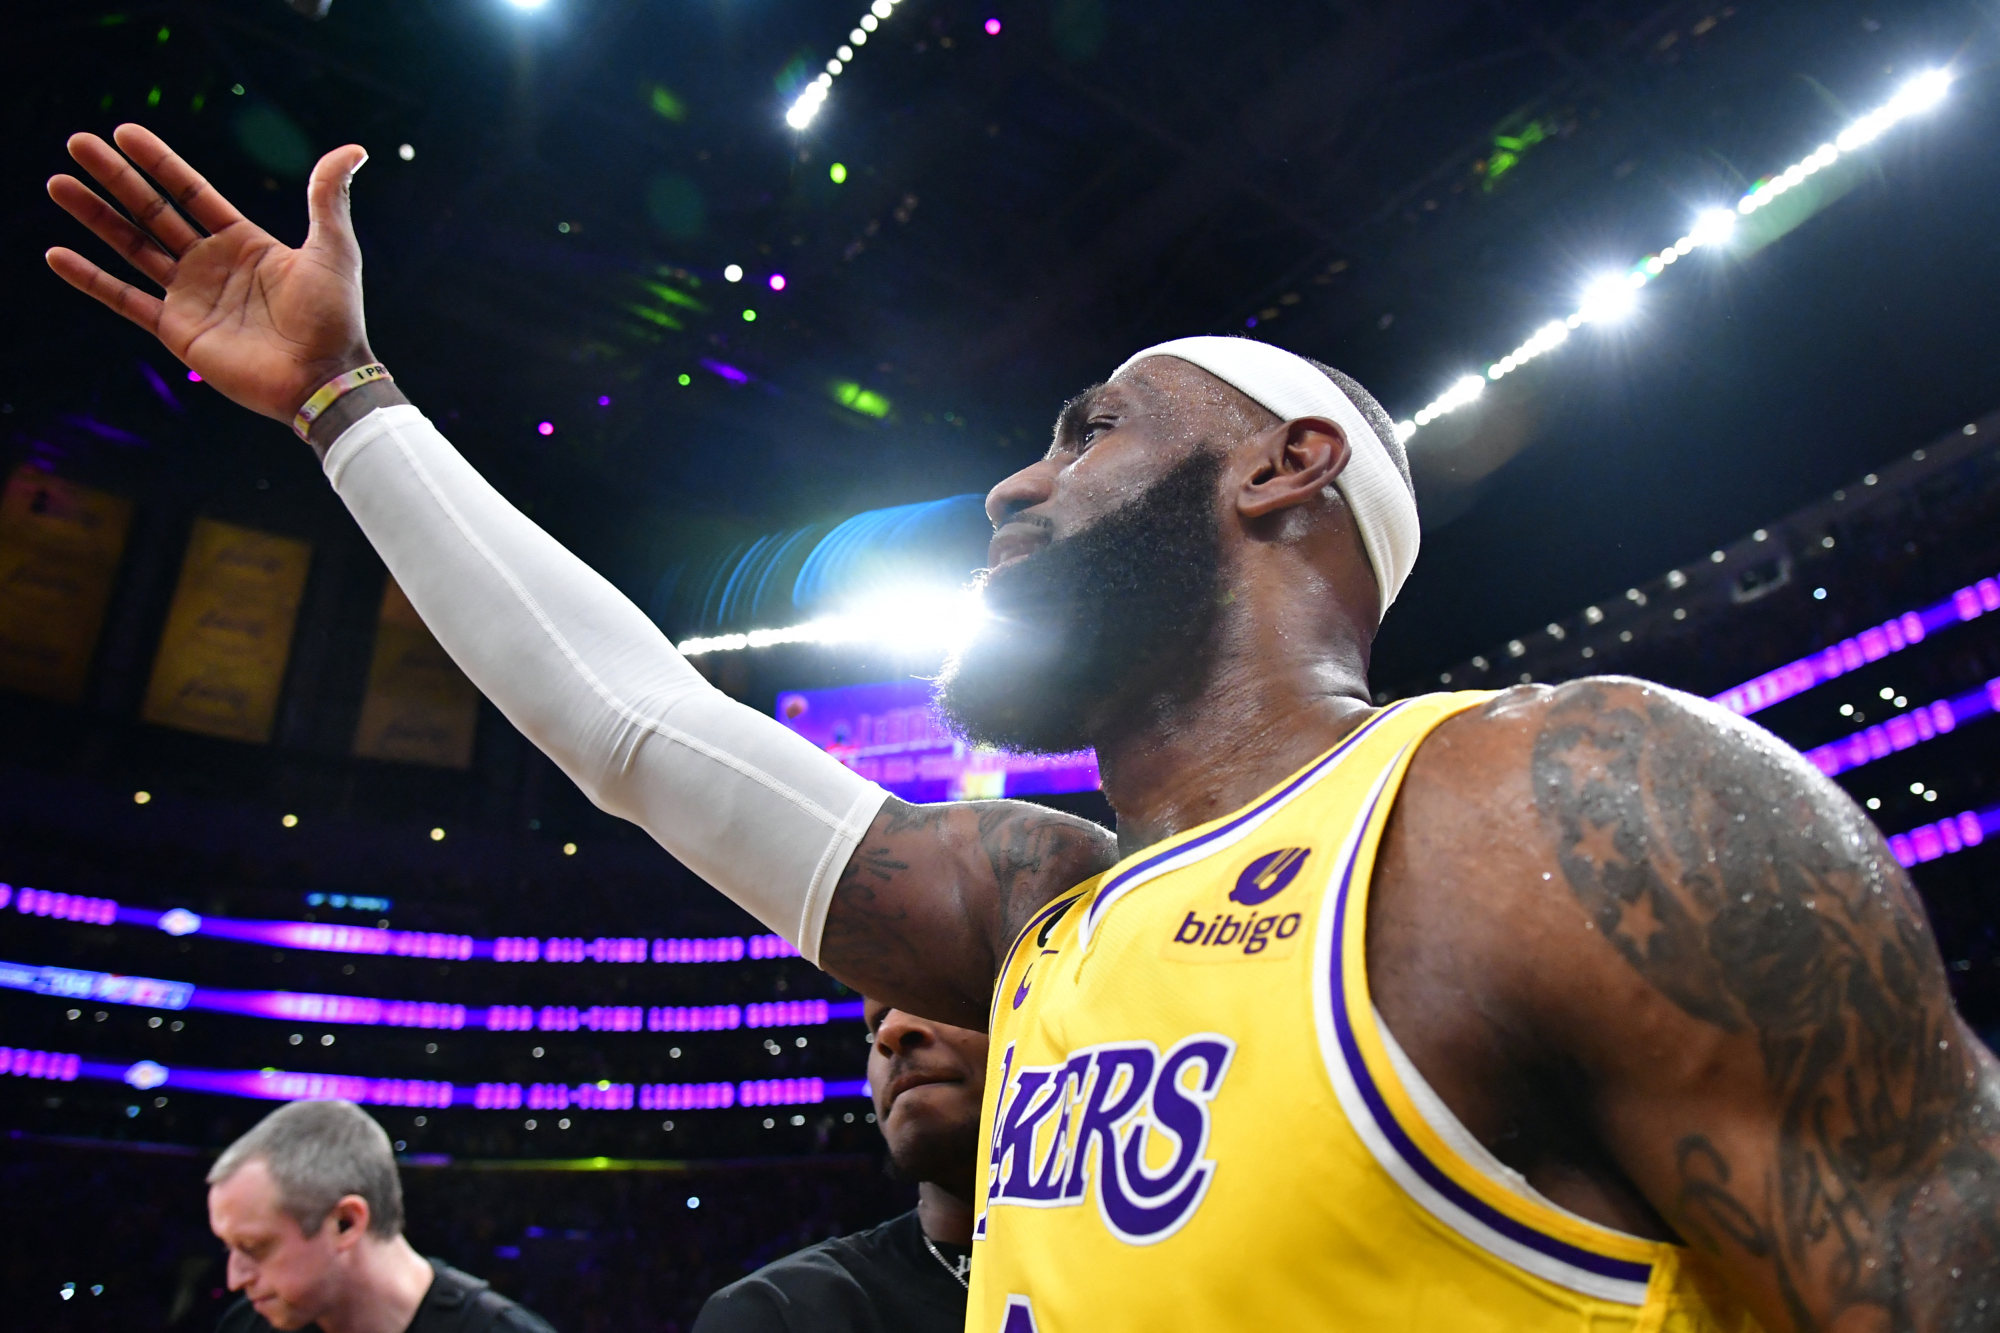 LeBron James says at ESPYS he will play for Lakers in upcoming season